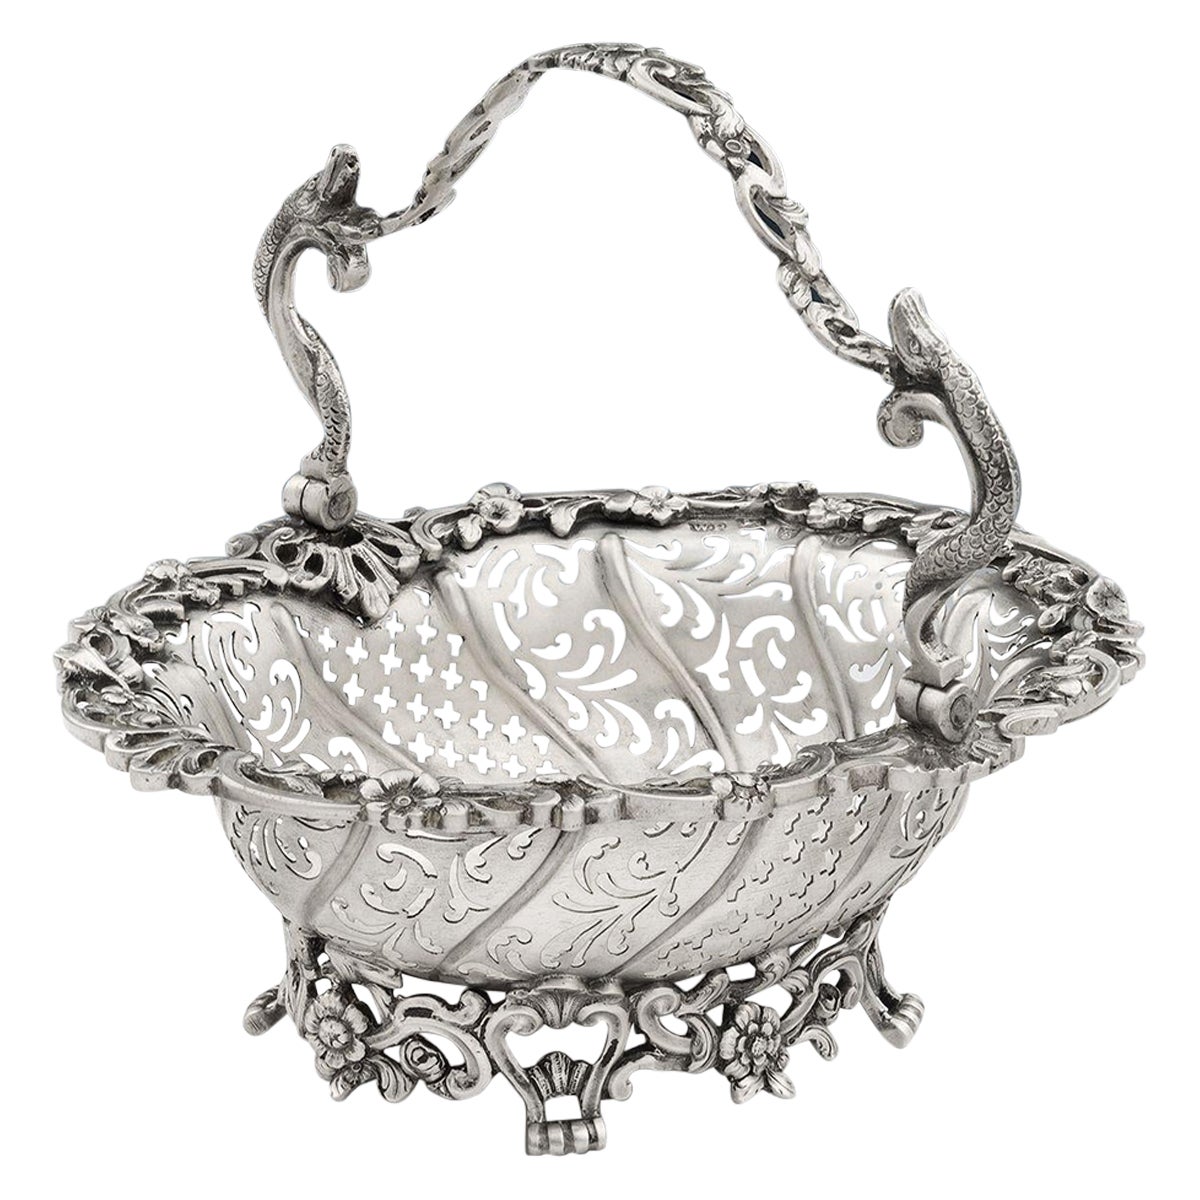 George II Cast Sweetmeat Basket Made in London by William Plummer, 1758